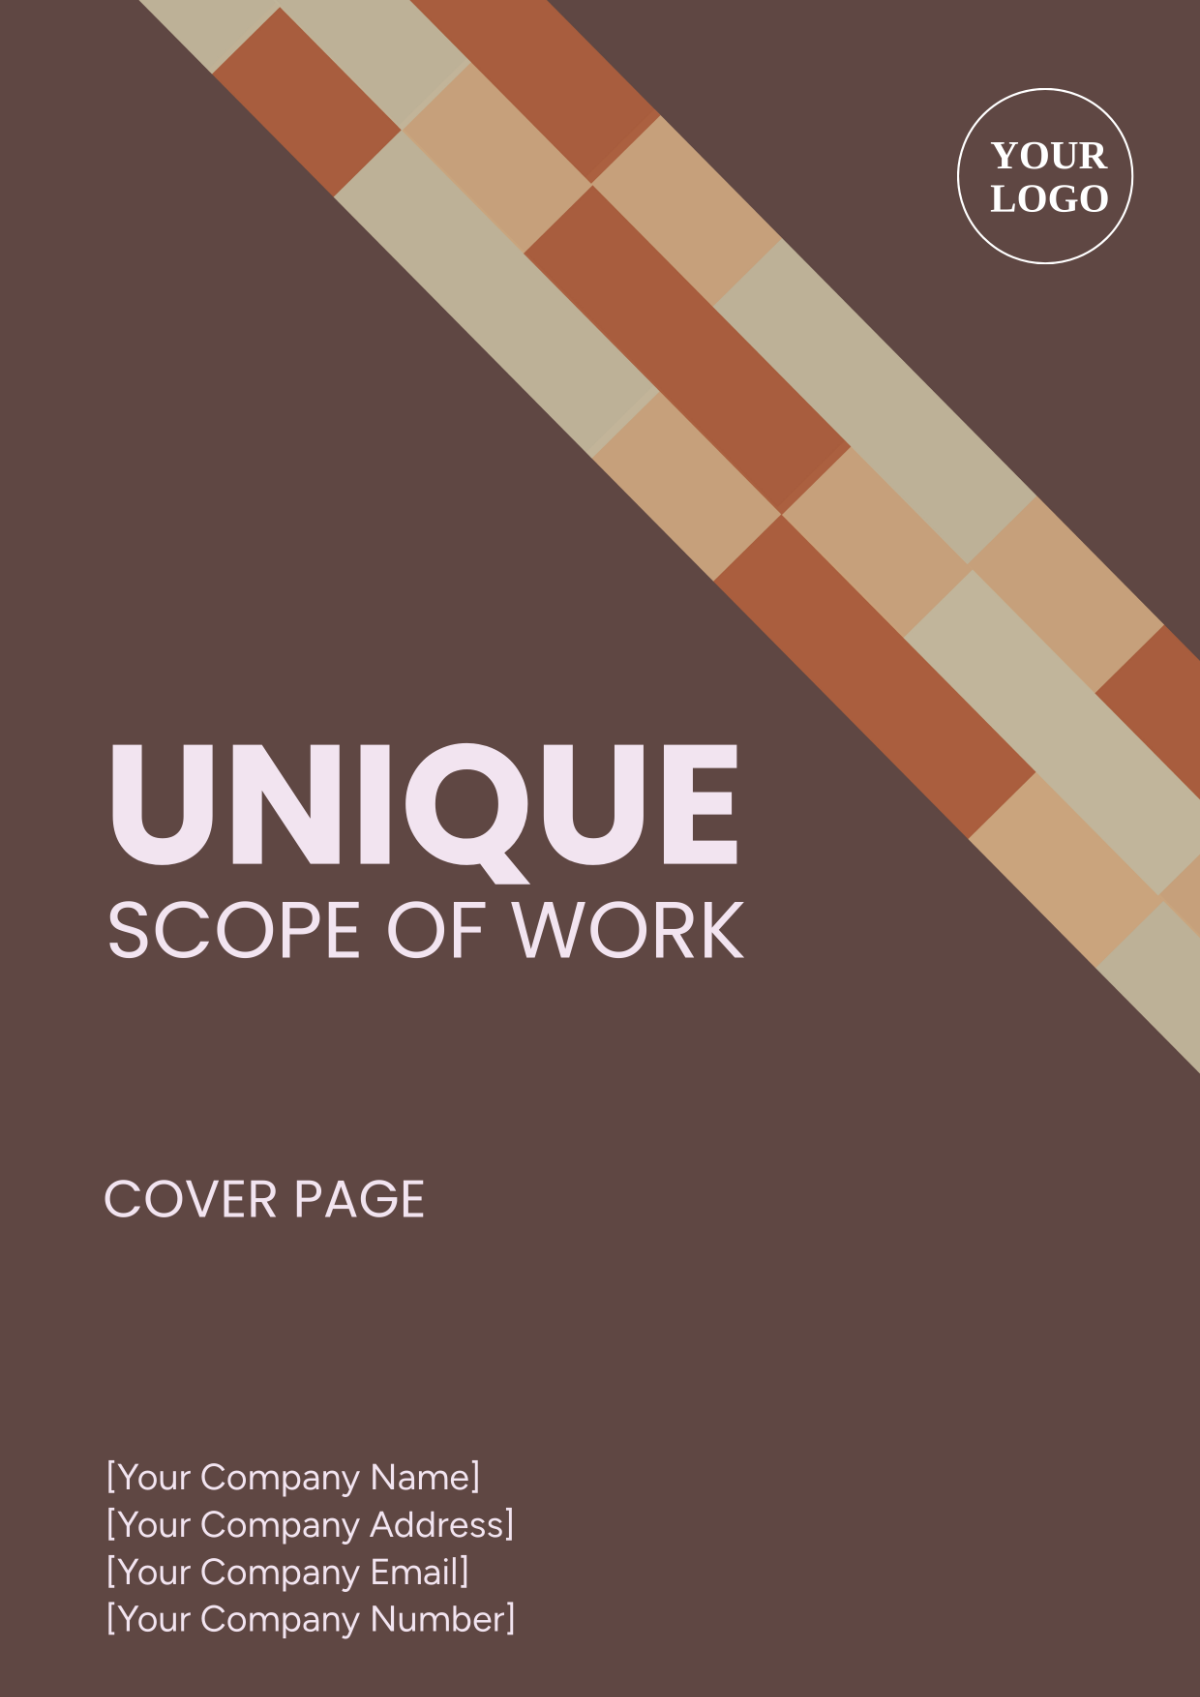 Unique Scope of Work Cover Page